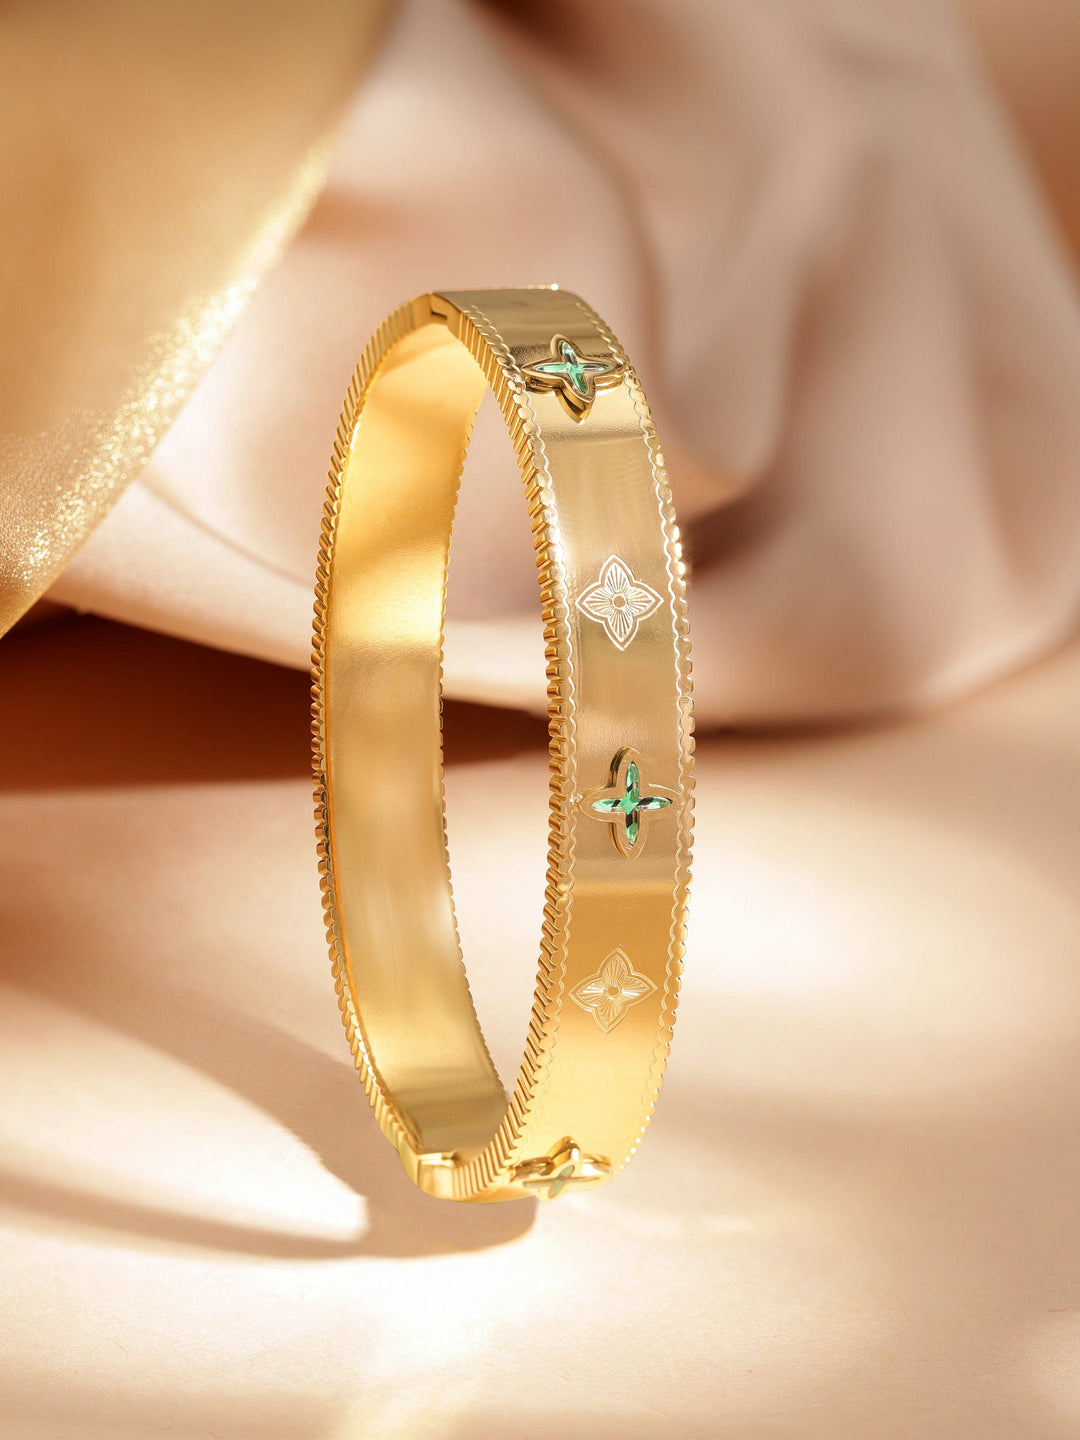 Stainless Steel, 18 KT Gold-Plated Emerald Studded Clover Bangle styled Bracelet – Waterproof and Tarnish-Free Bangles & Bracelets